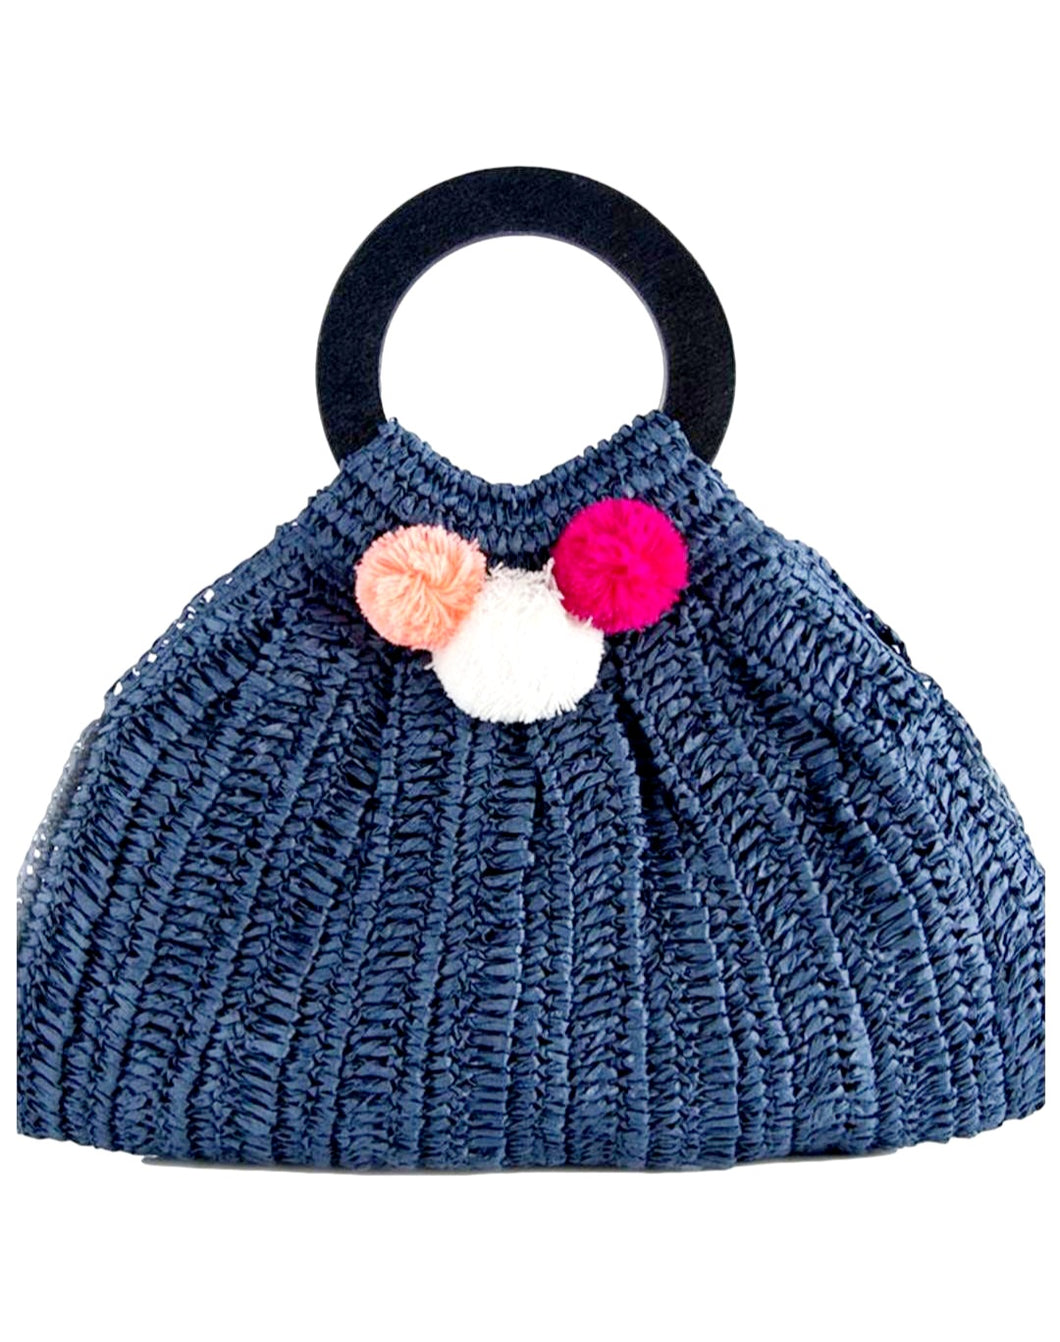 Women's Blue Straw Handbag with Wood Handles and Colorfull Pompoms